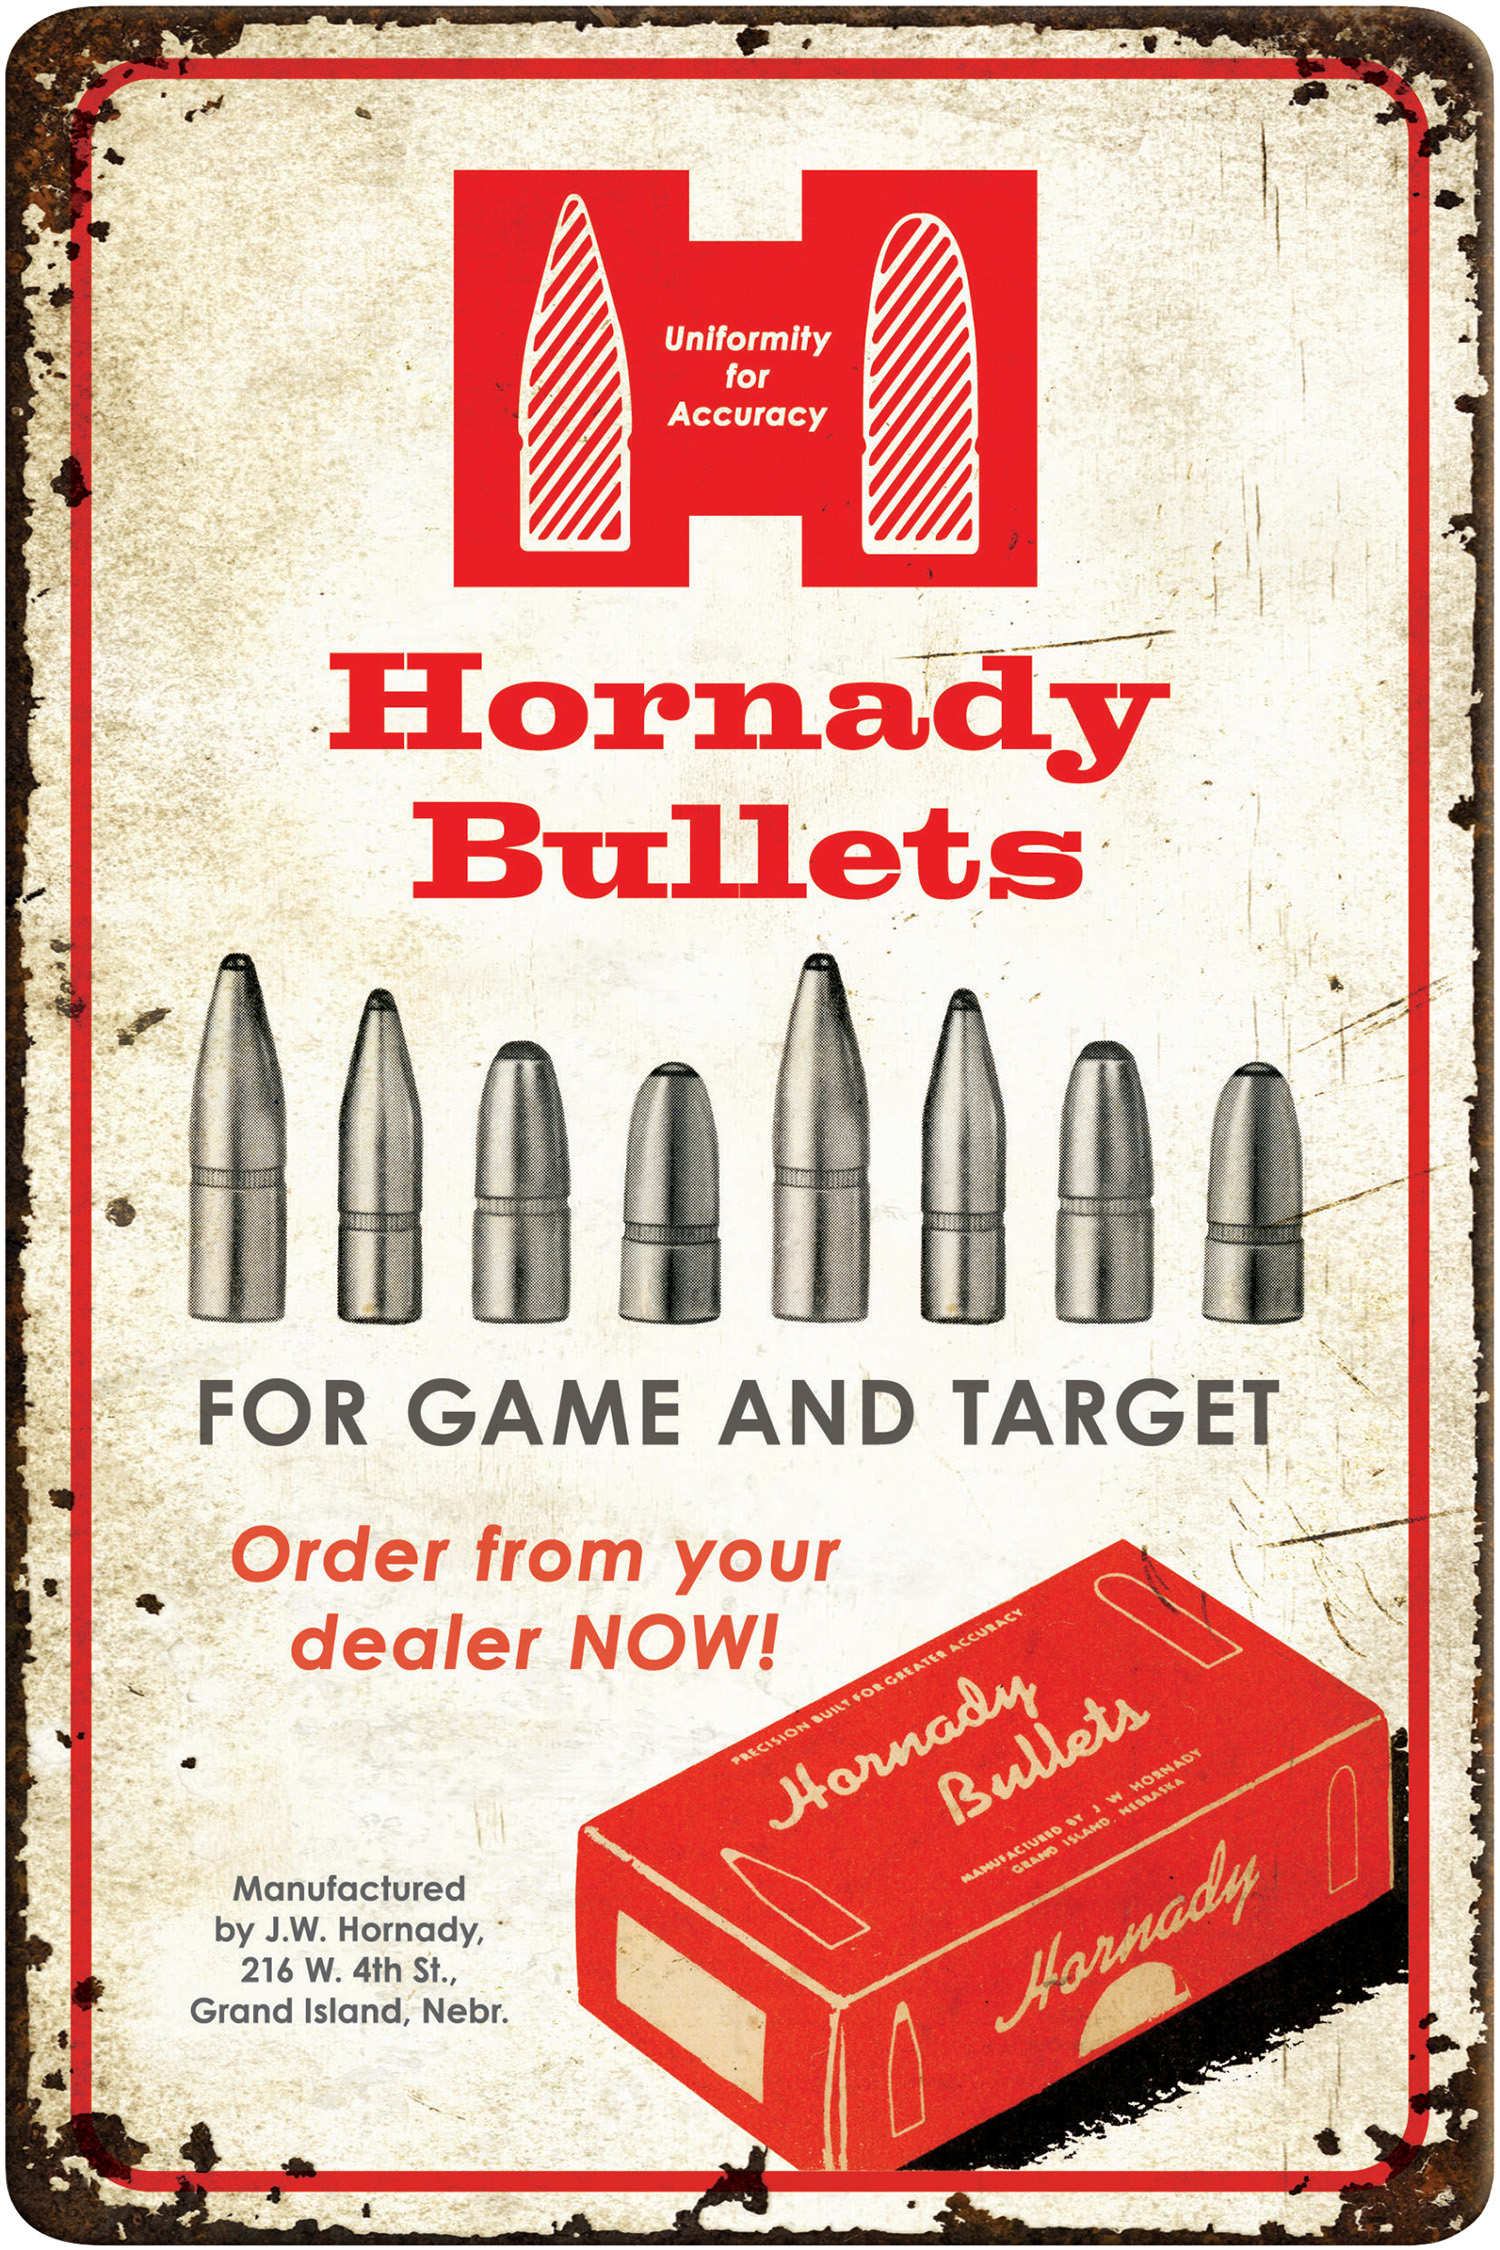 Hornady 99145 Bullets Tin Sign Rustic Red White Aluminum 12